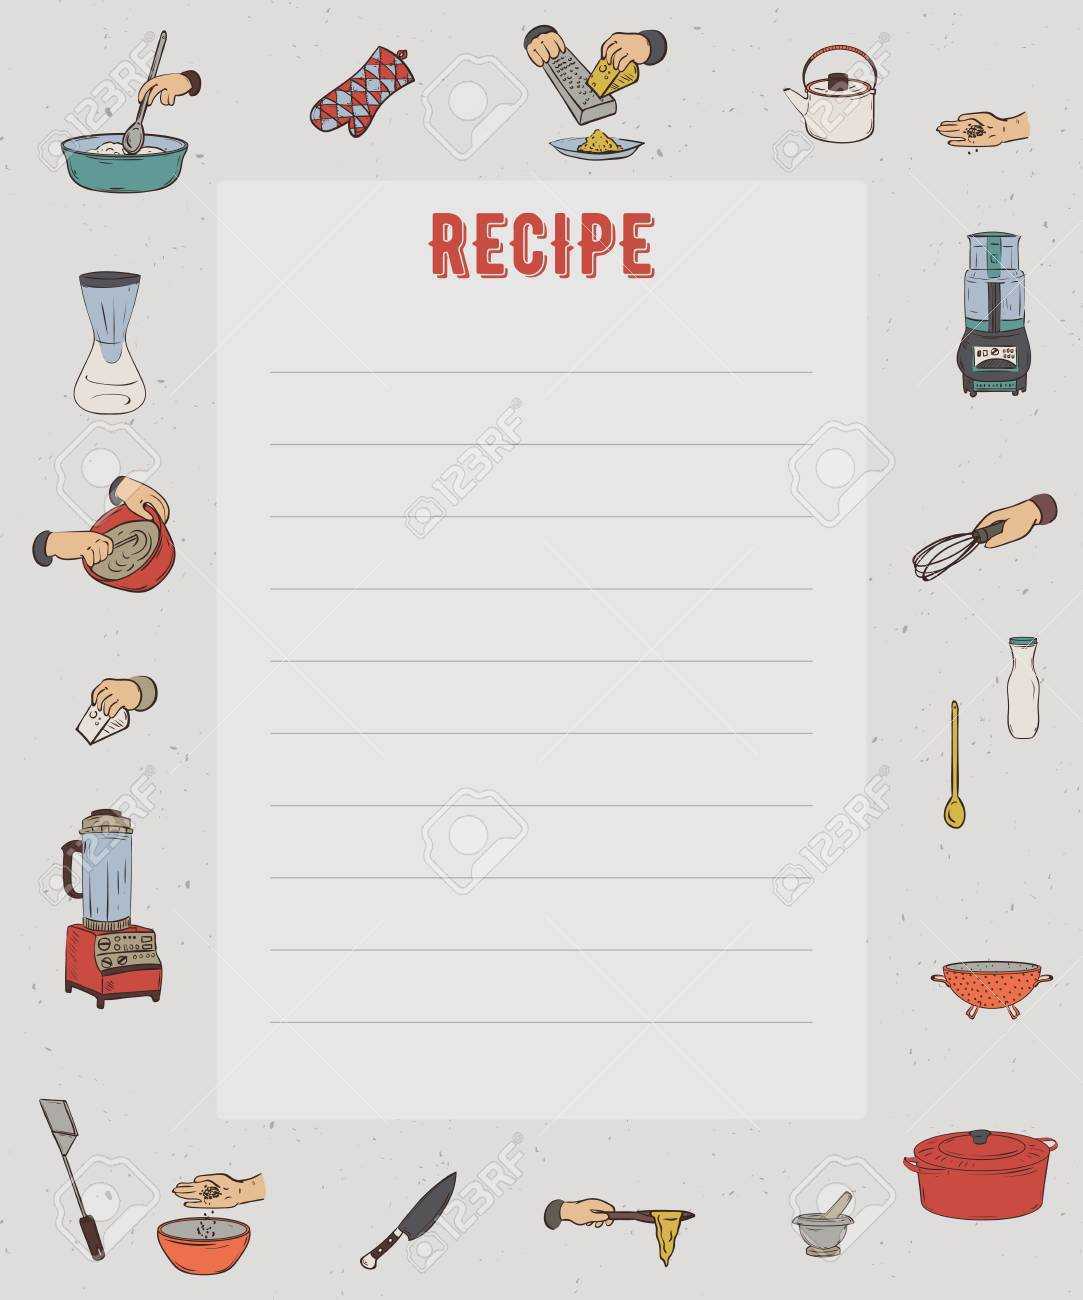 Recipe Card. Cookbook Page. Design Template With Kitchen Utensils.. Pertaining To Restaurant Recipe Card Template